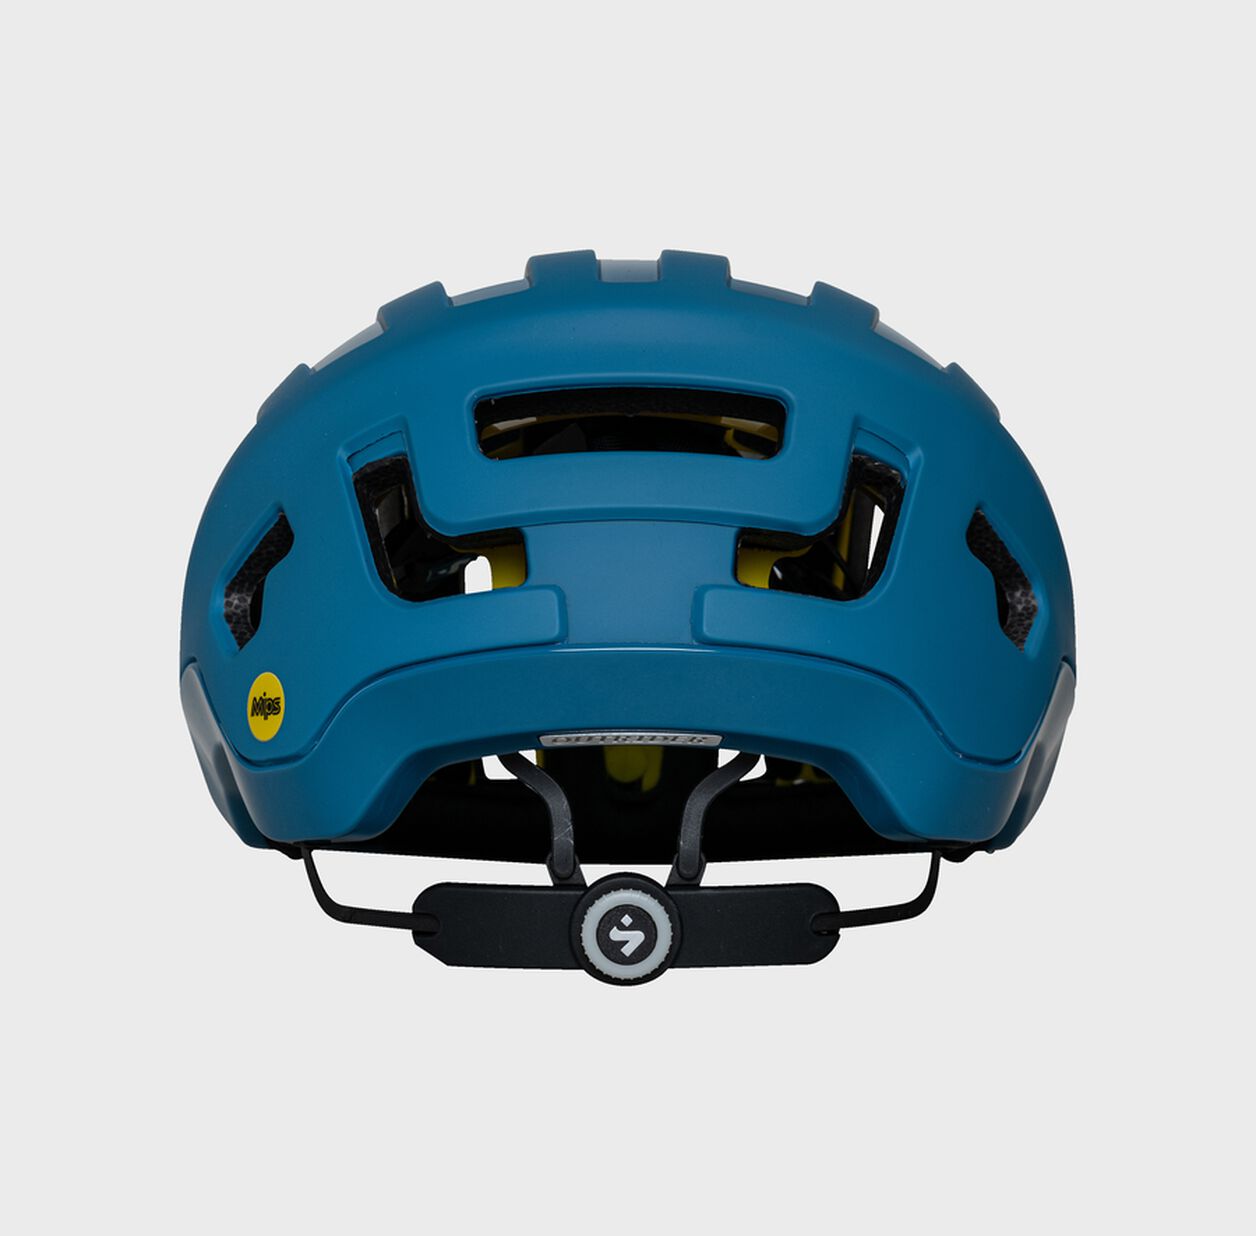 845082 Outrider Mips Helmet Meame Product 4 Sweetprotection